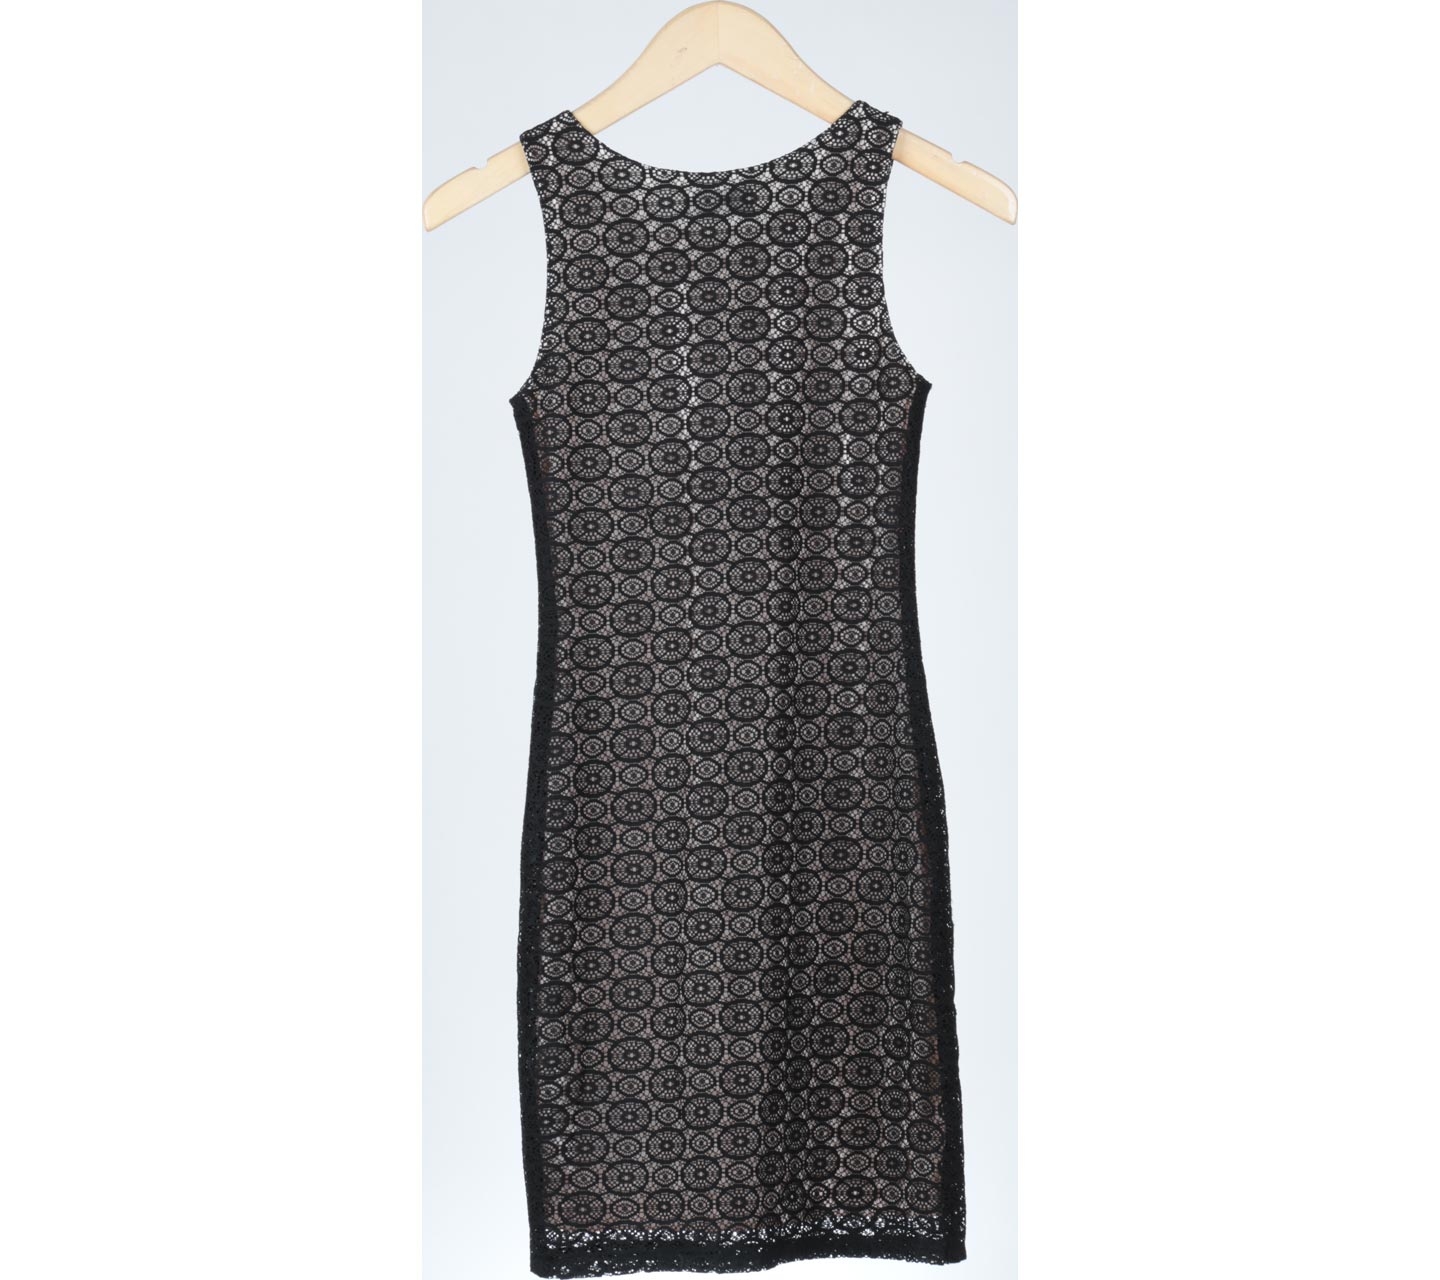 In A Beat Black And Cream Lace Sleeveless Mini Dress